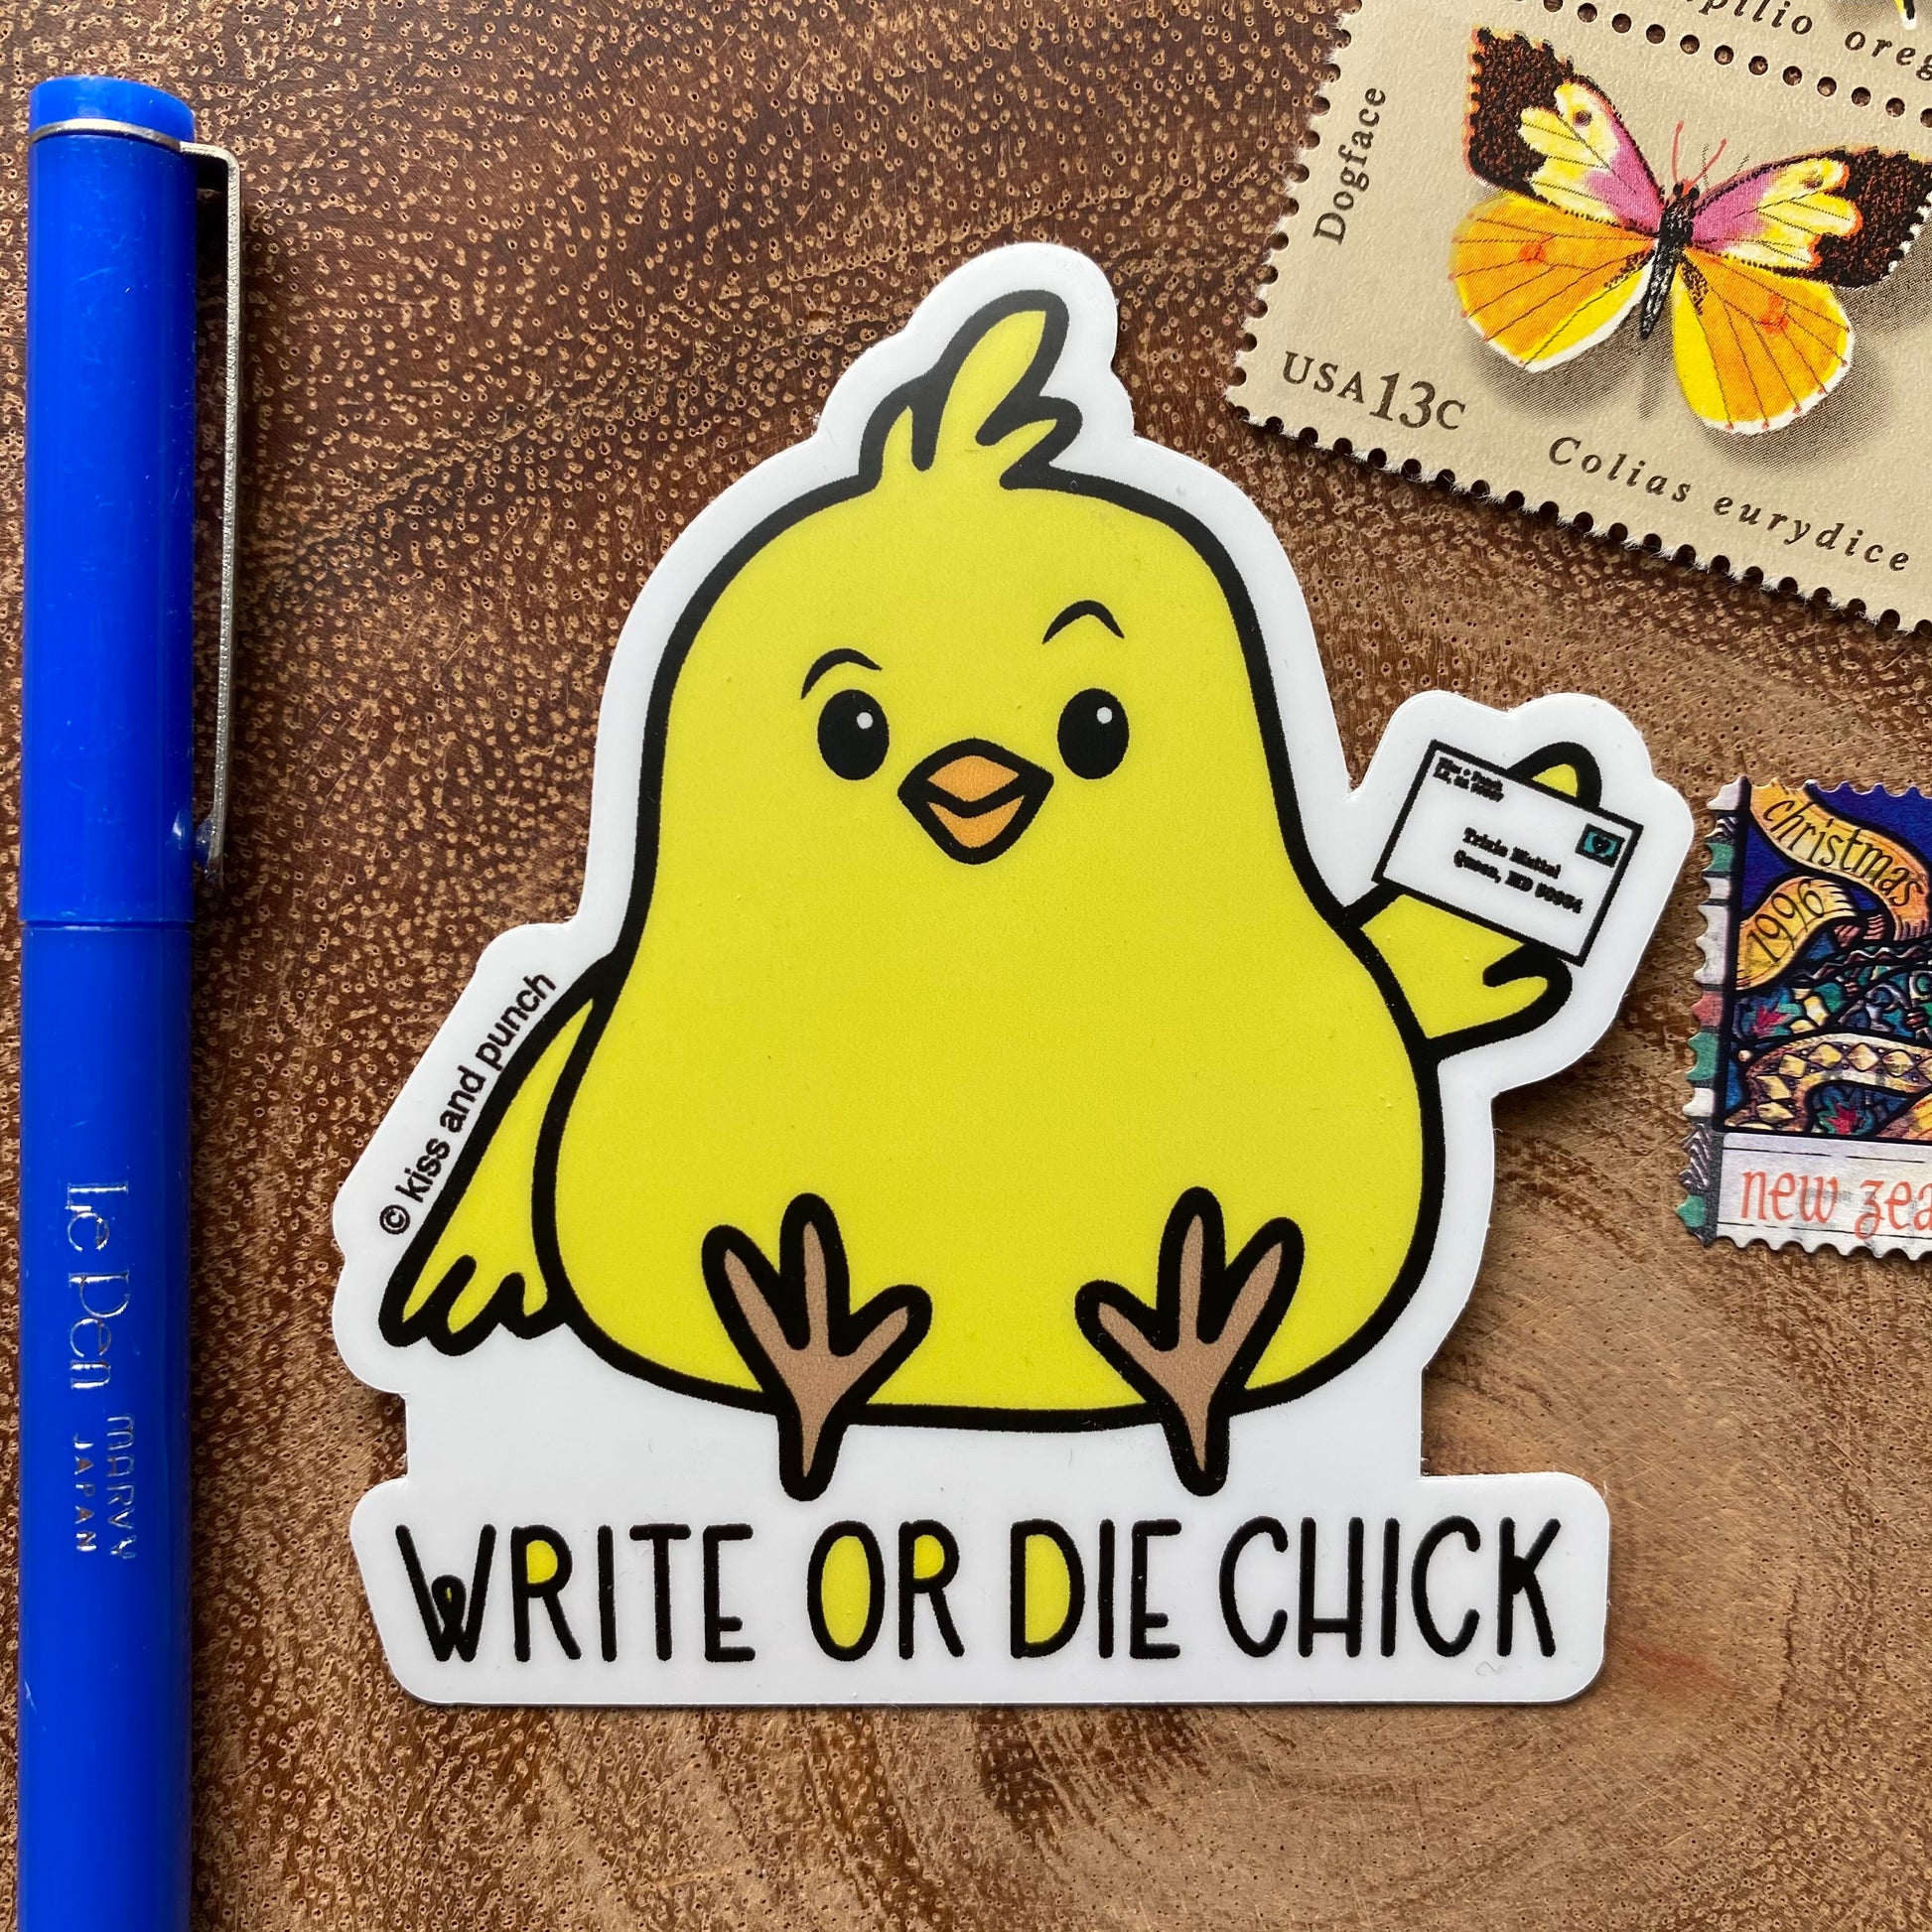 3 Inch Write or Die Chick Vinyl Sticker - Laptop Sticker - Water Bottle Sticker - Phone Case Sticker - Kiss and Punch